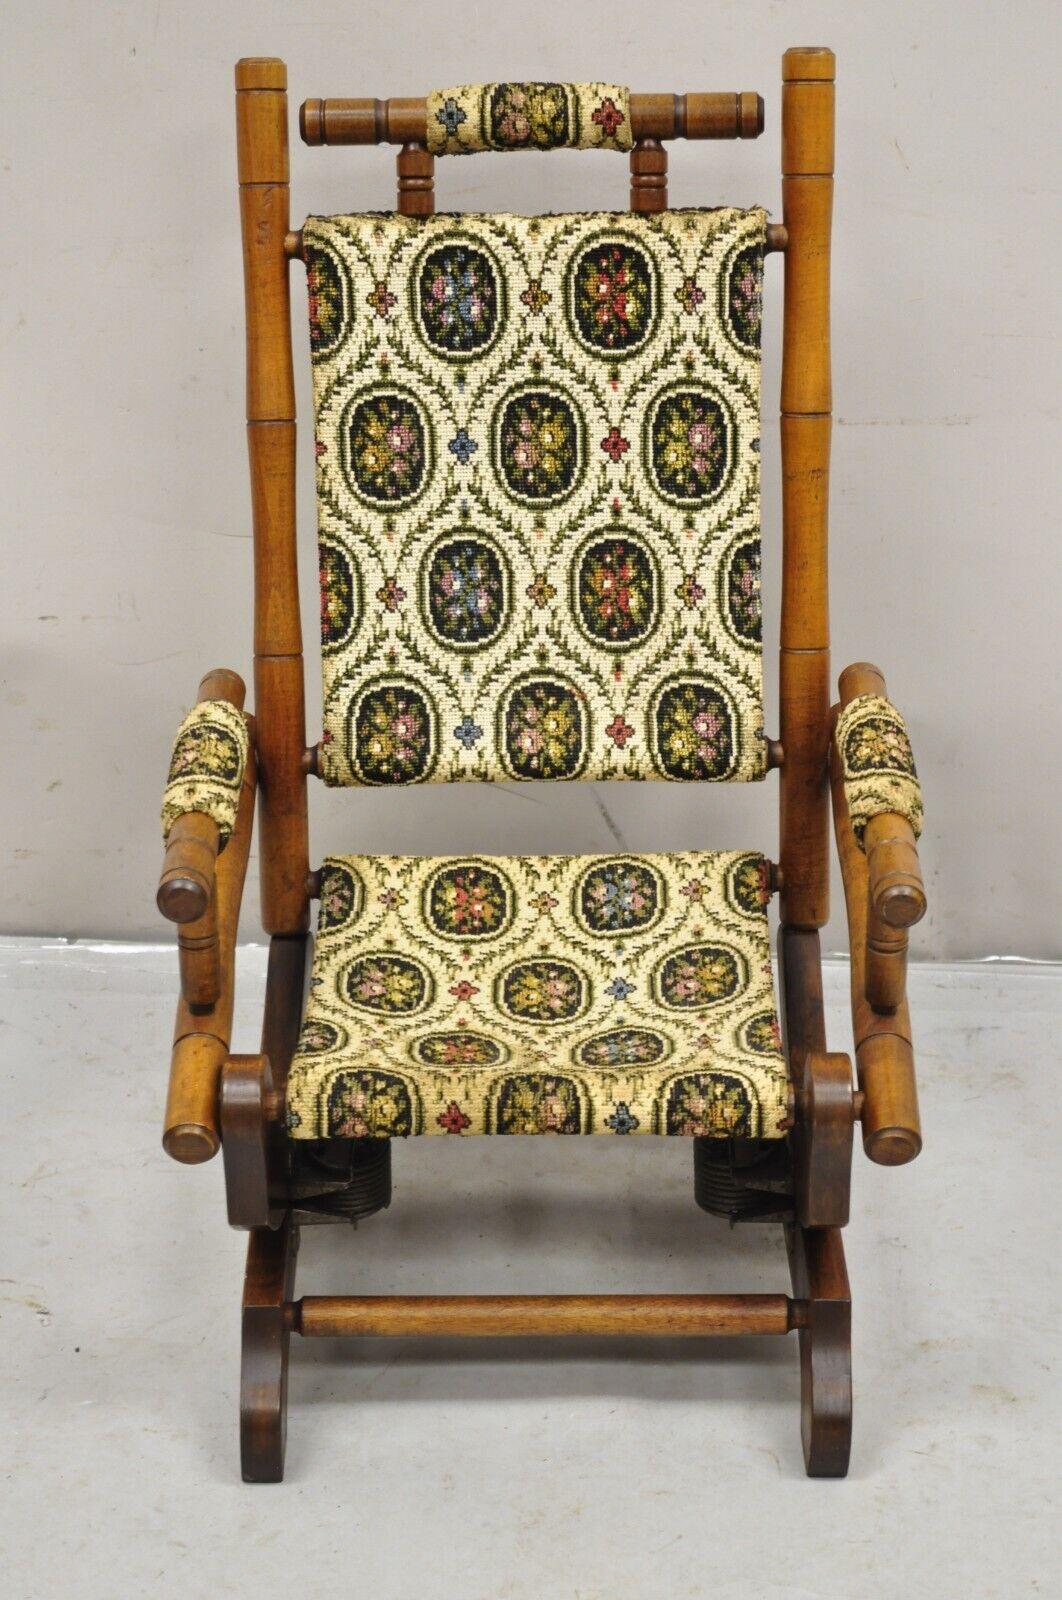 Antique Victorian Small Child's Maple Wood Platform Rocker Rocking Chair. Item features floral tapestry upholstery, platform spring rocker, unique small chair. Circa 1900. Measurements: 25.5